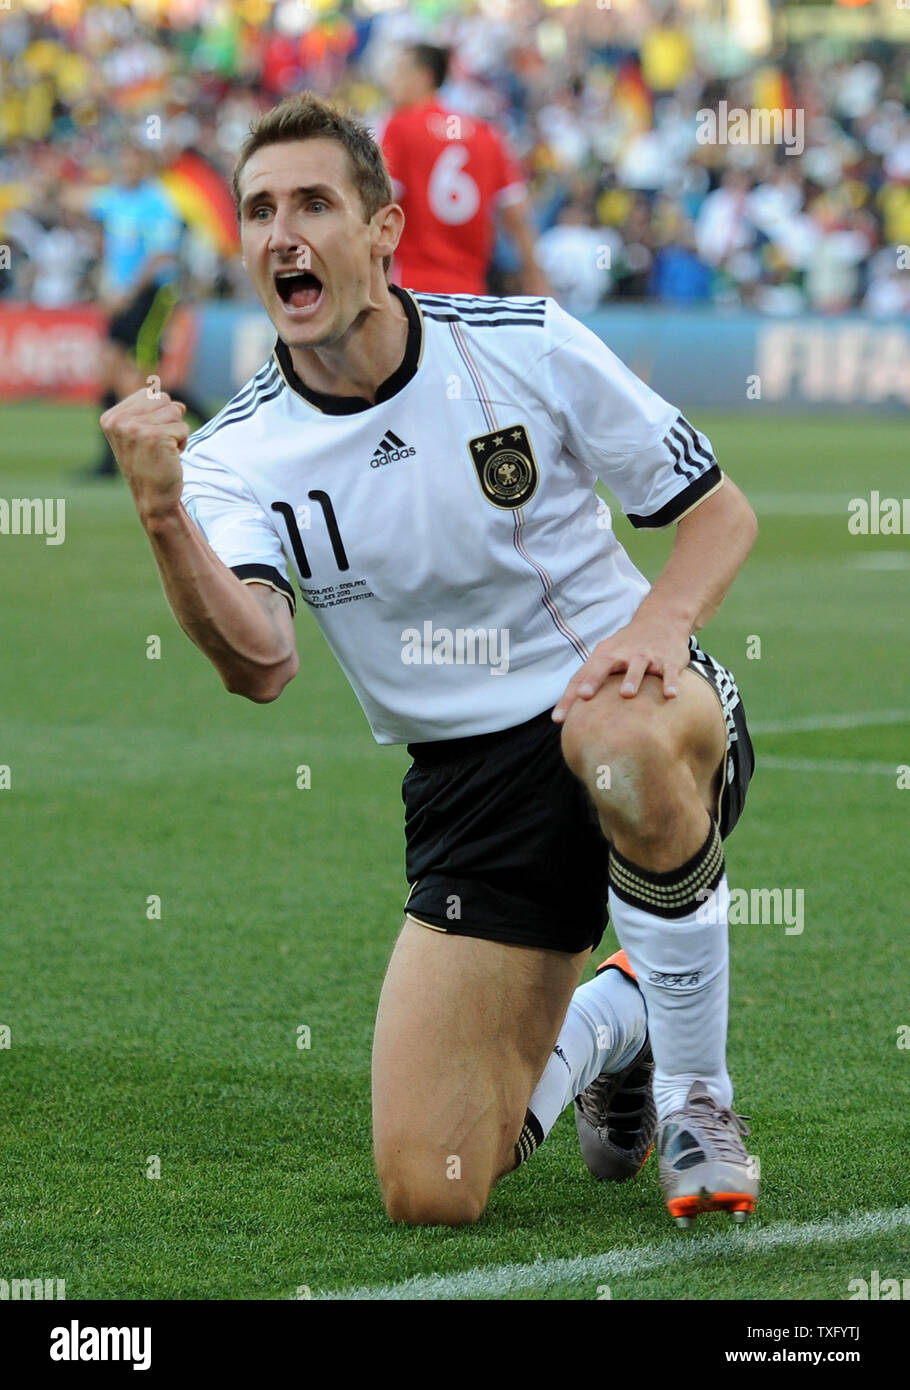 Miroslav Klose of Germany celebrates scoring his side's opening goal during the Round 16 match at the Free State Stadium in Bloemfontein, South Africa on June 27, 2010. UPI/Chris Brunskill Stock Photo